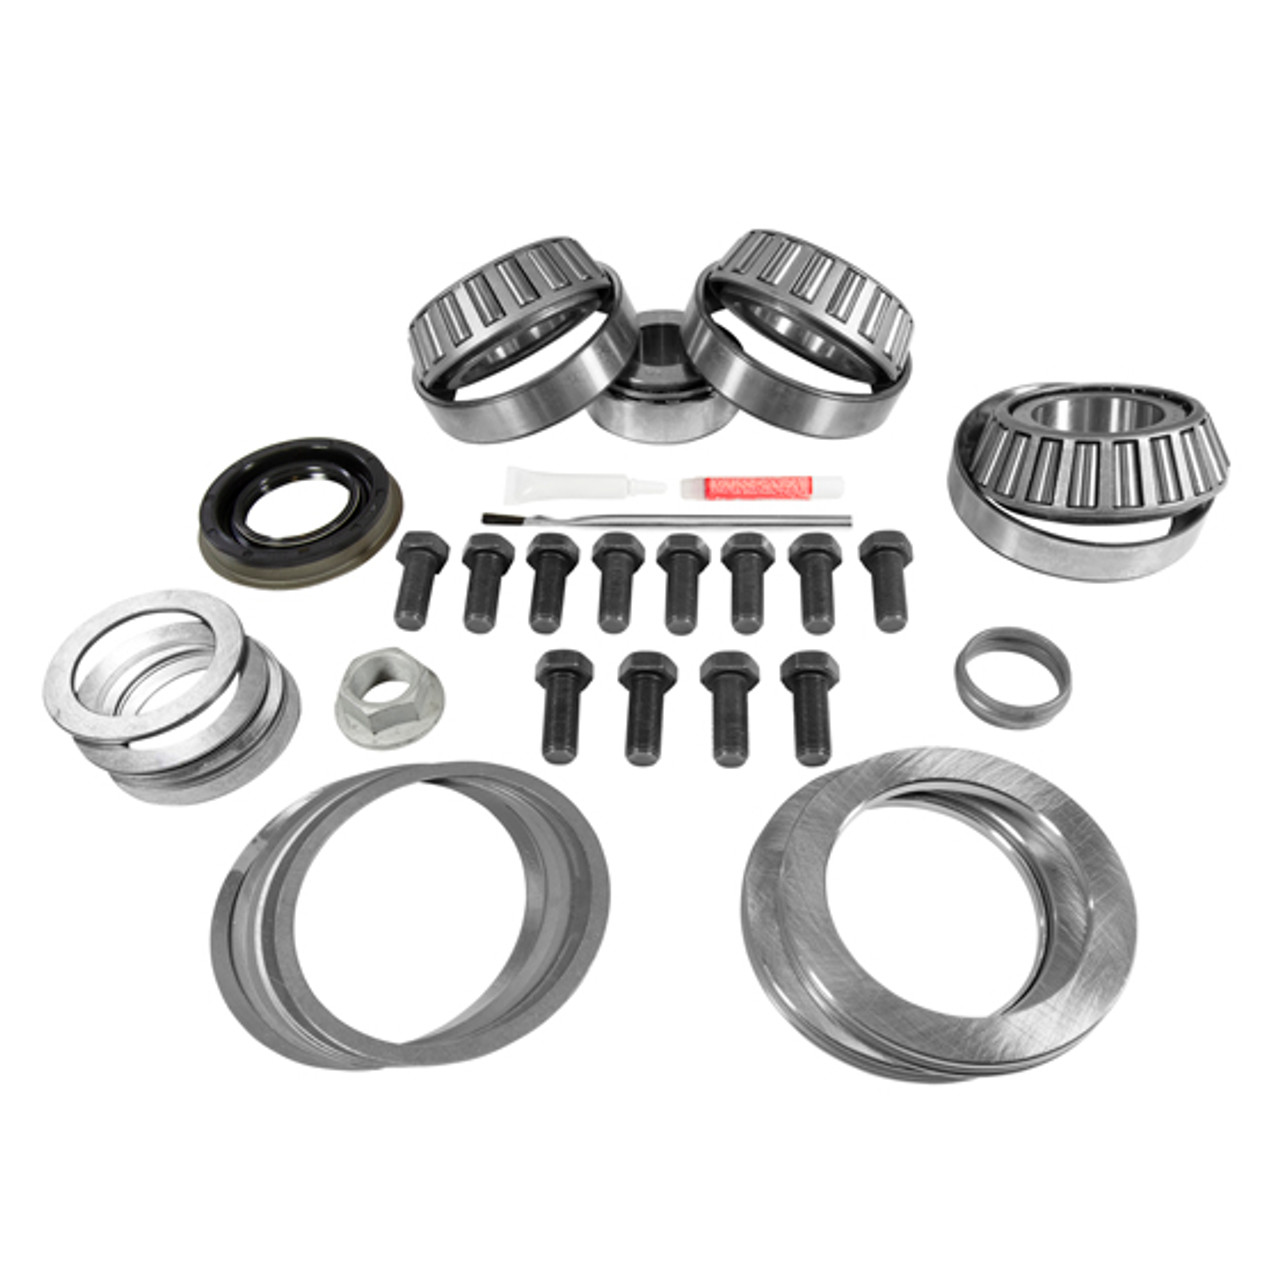 USA Standard Master Overhaul kit for 2008-2010 Ford 10.5" differentials using aftermarket 10.25" R&P